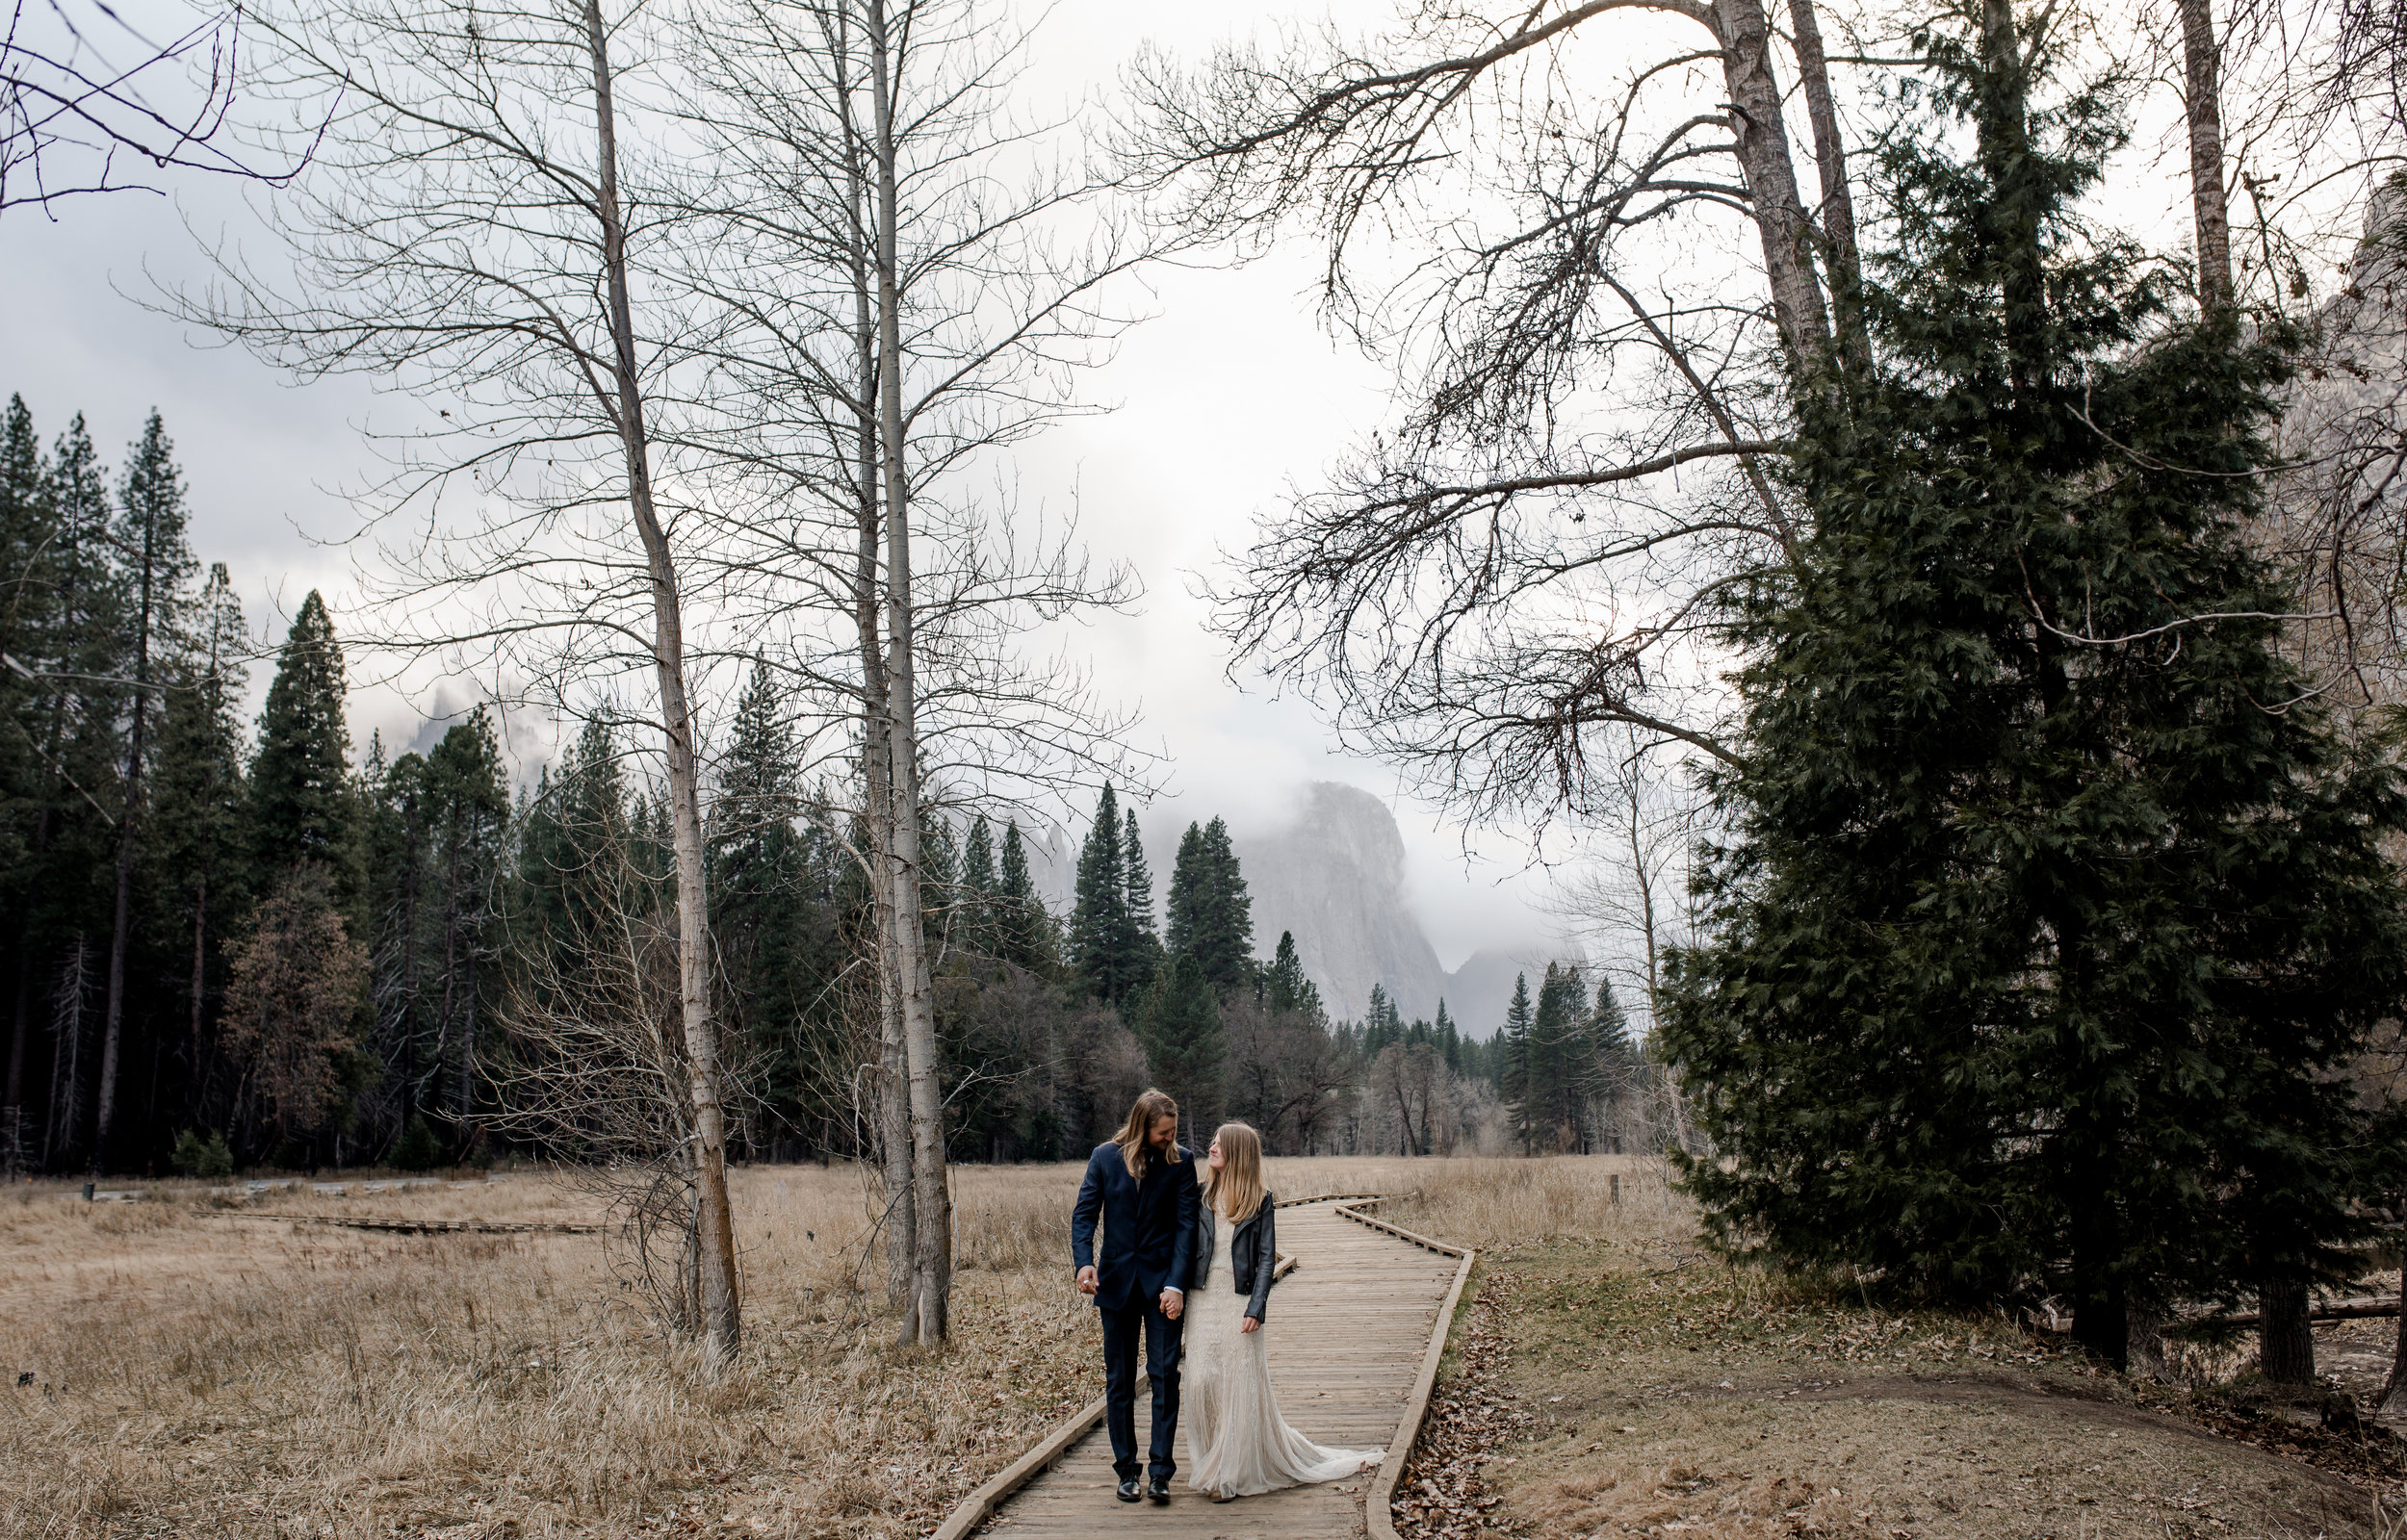 nicole-daacke-photography-yousemite-national-park-elopement-photographer-winter-cloud-moody-elope-inspiration-yosemite-valley-tunnel-view-winter-cloud-fog-weather-wedding-photos-86.jpg